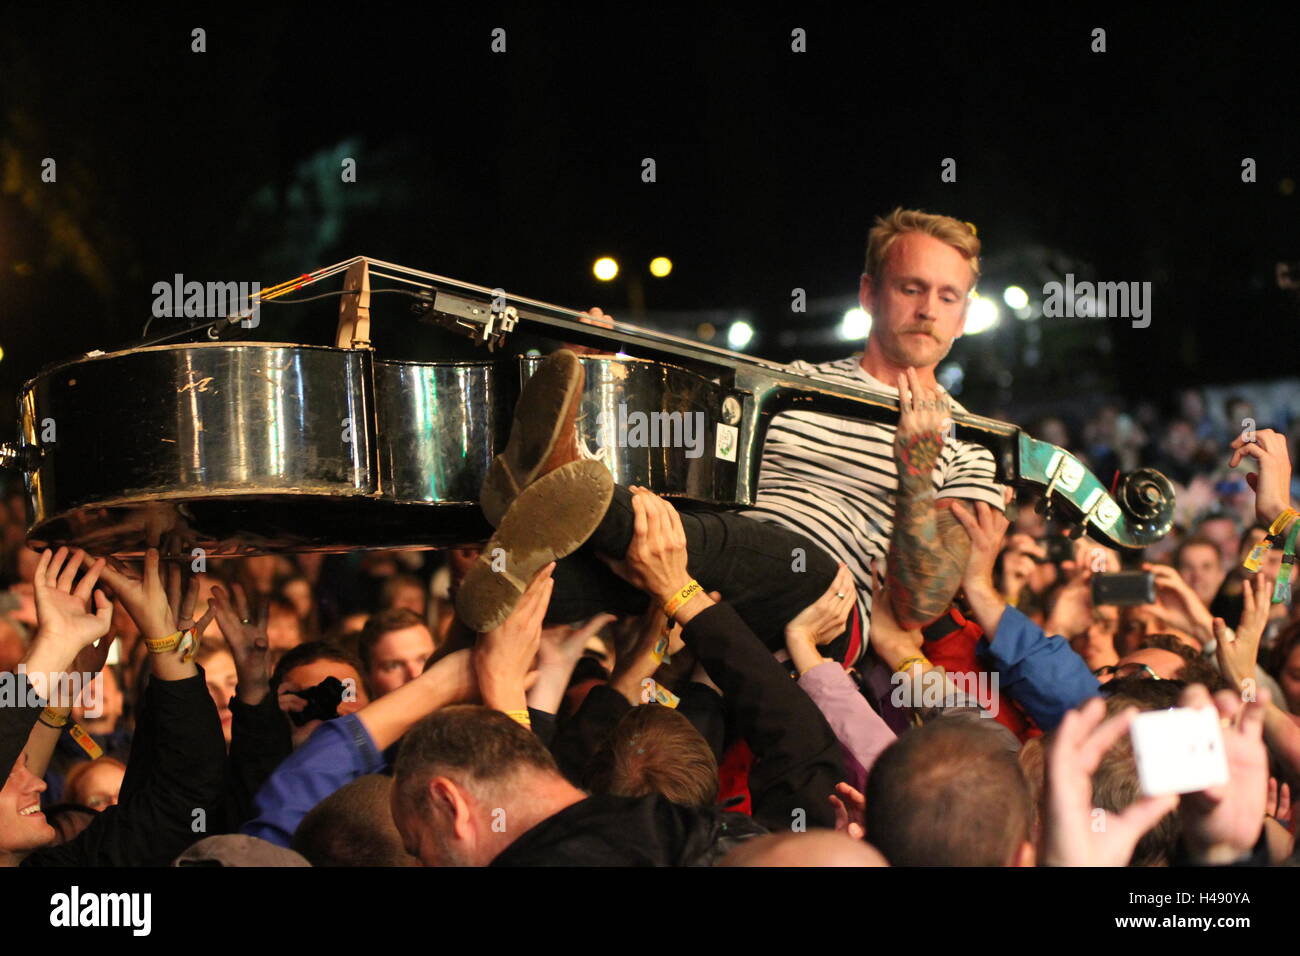 Michael Camino of Skinny Lister surfs a crowd at the Colours of Ostrava music festival, Czech Republic, 14 July 2016. Stock Photo